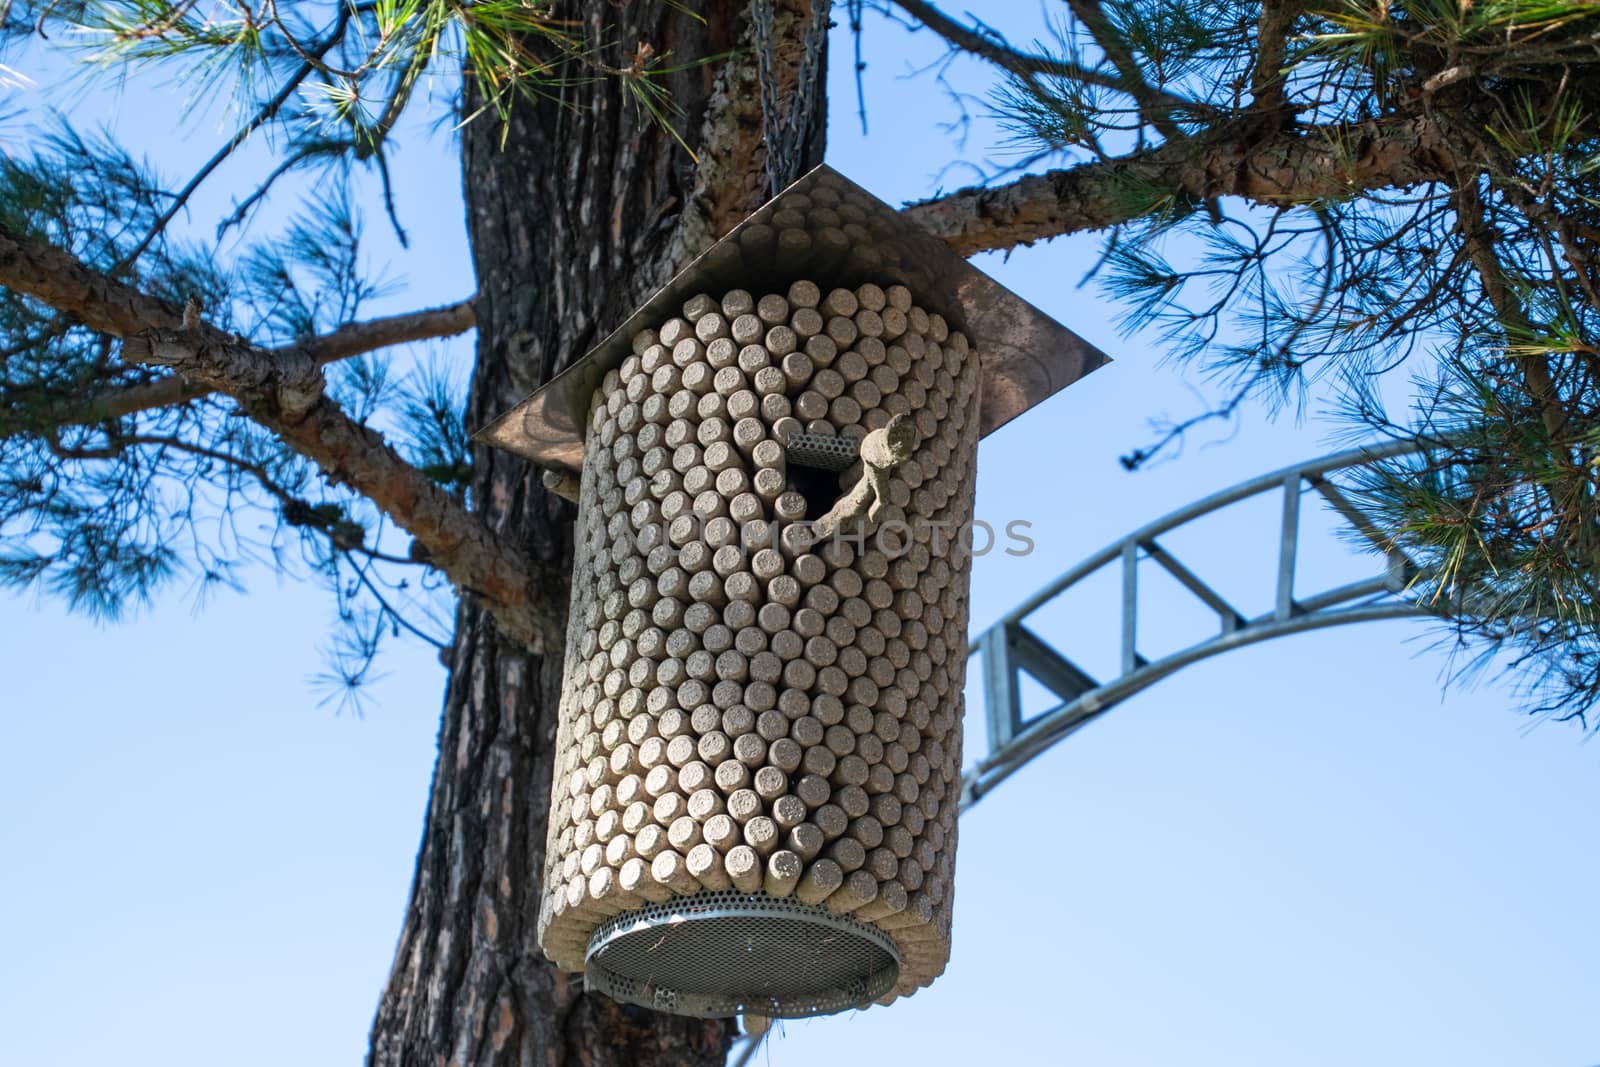 Birdhouse made from corks from wine bottles. Birdhouse on a pine tree.